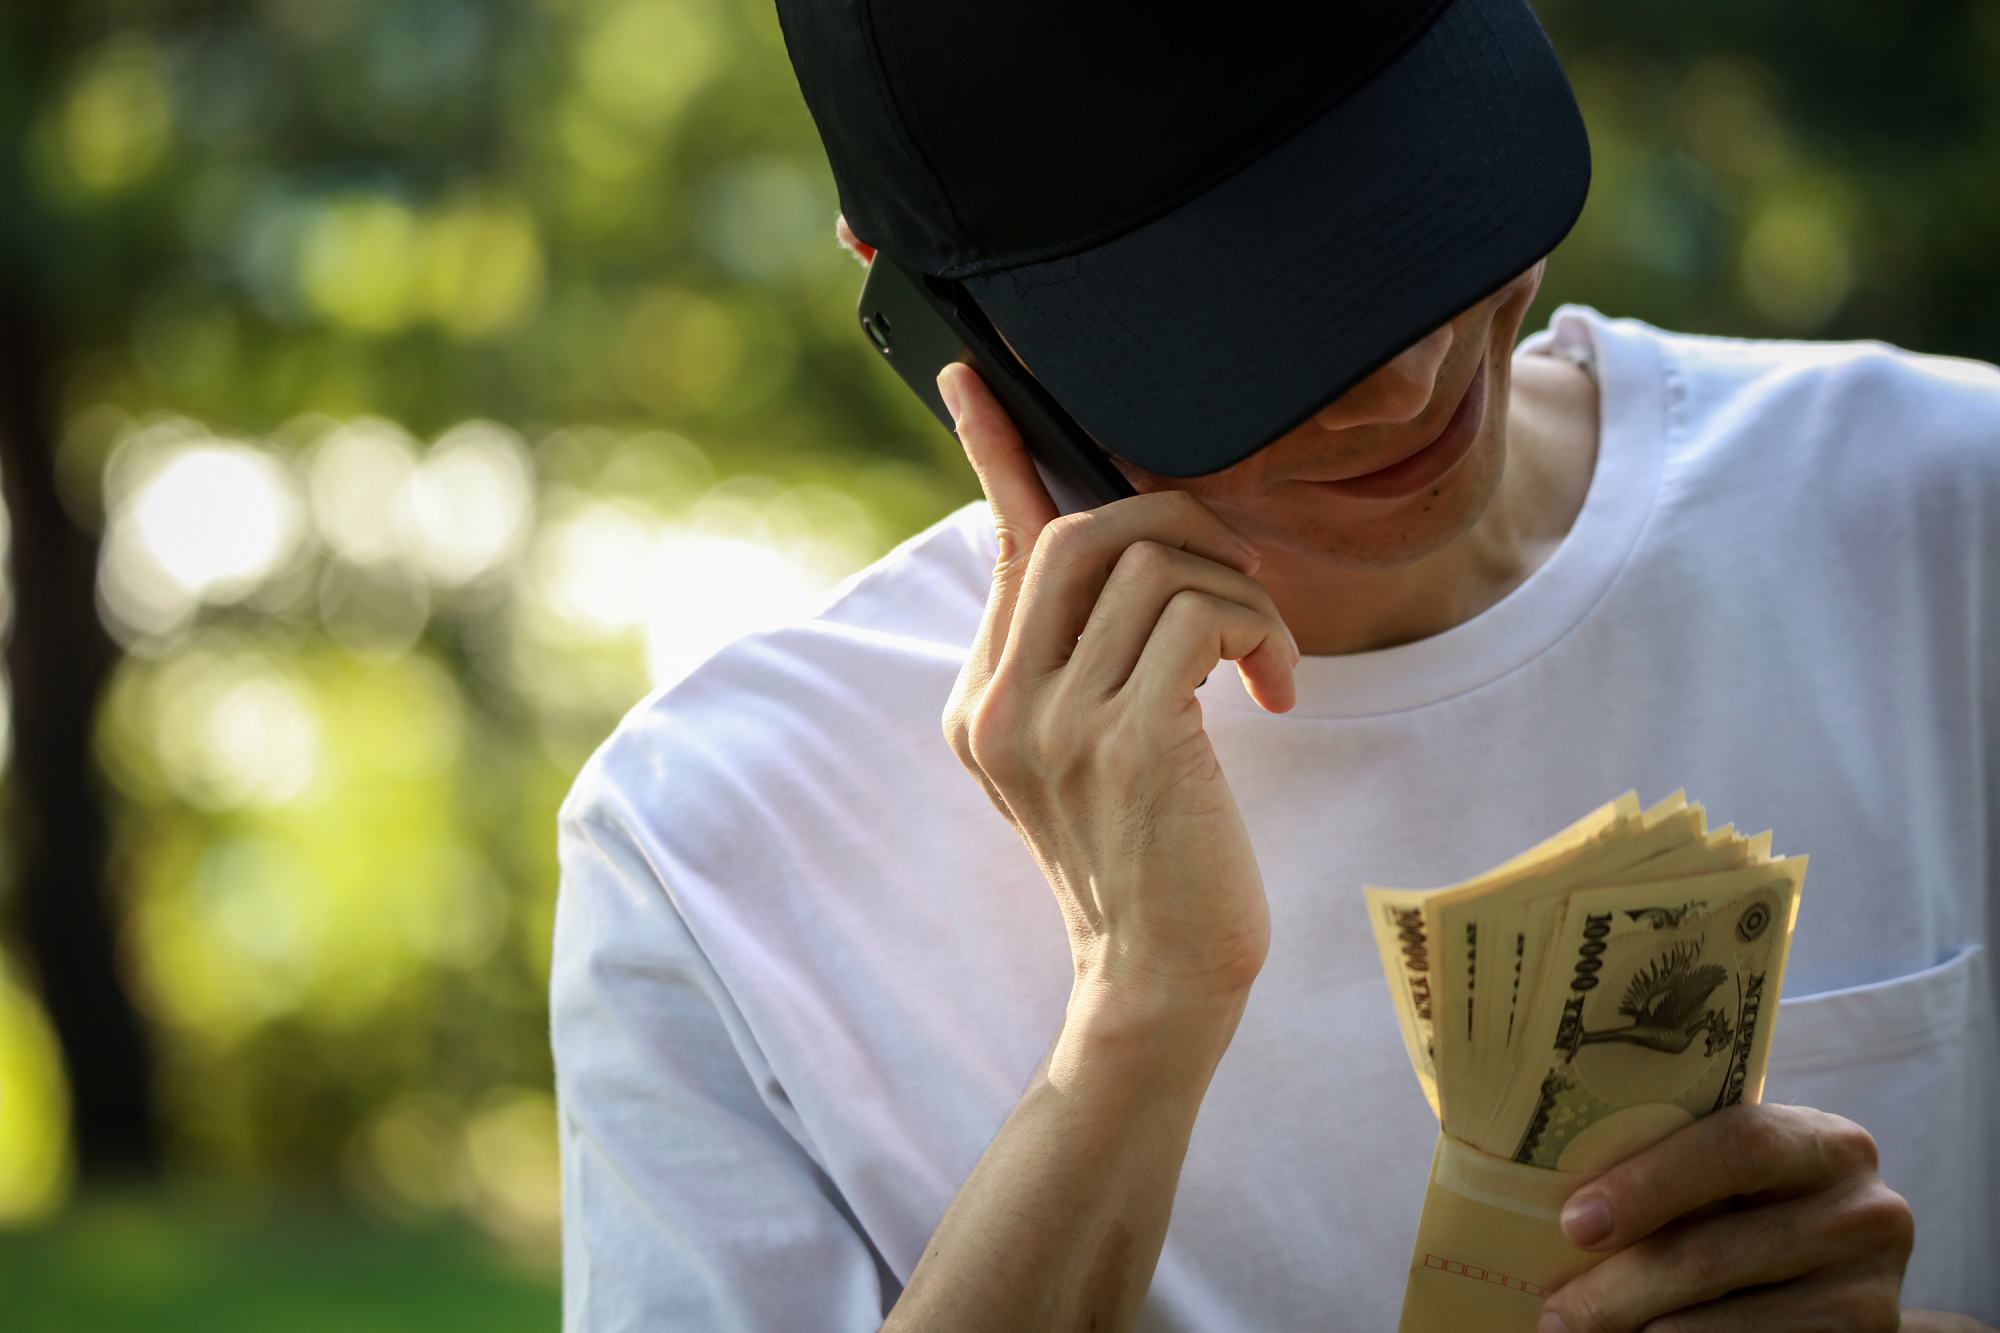 A young man speaks on a mobile phone while looking at an envelope full of Japanese banknotes.